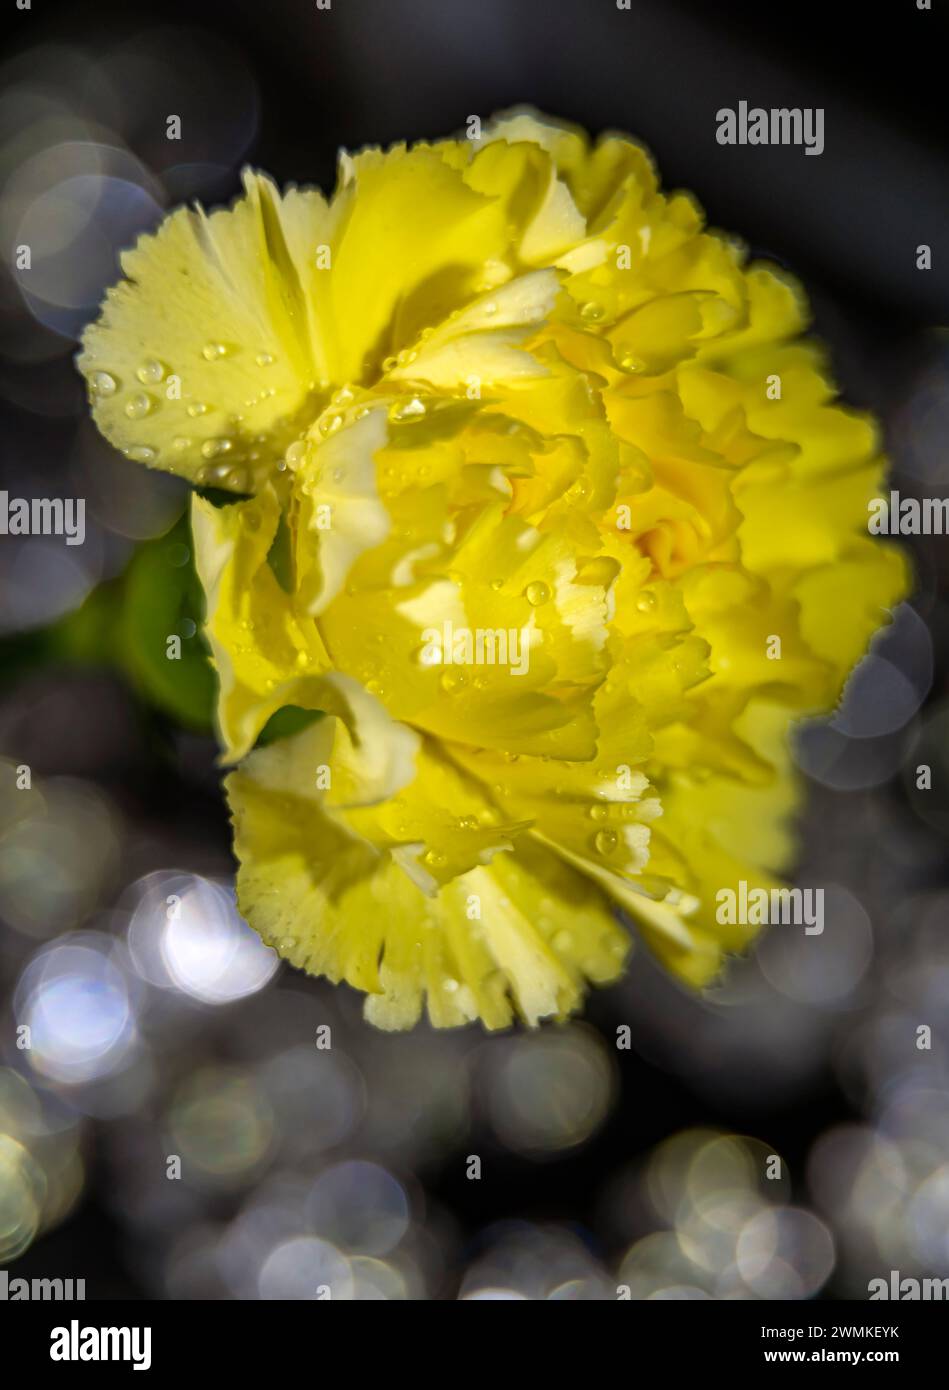 Close-up of a beautiful yellow carnation (Dianthus caryophyllus) with water droplets; Studio Stock Photo